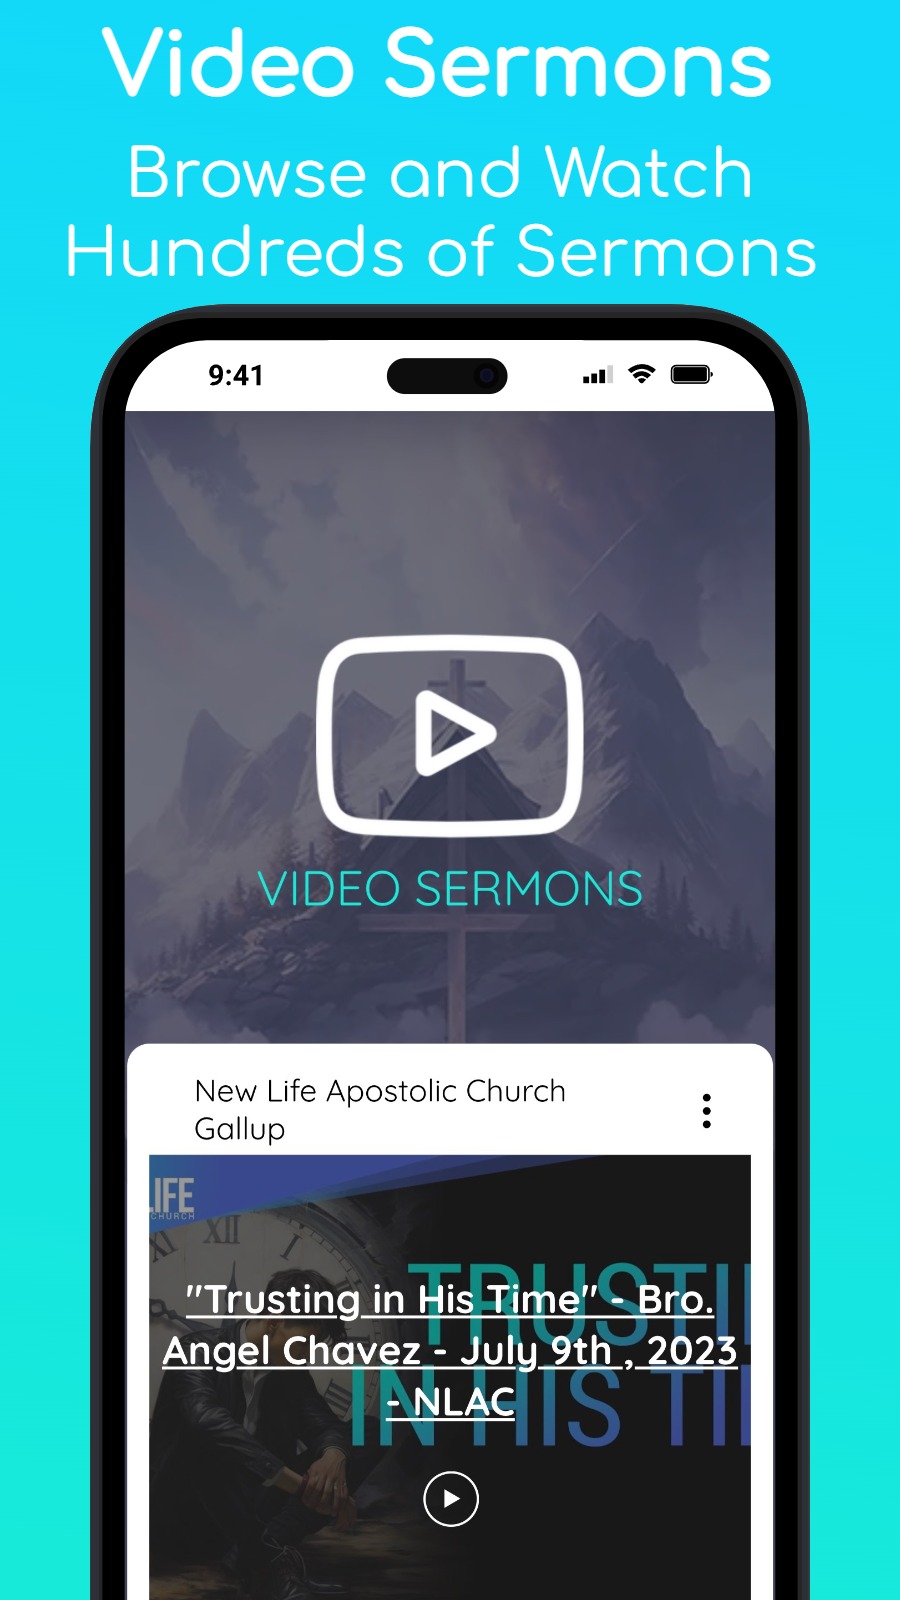 Video Sermons - Browse and Watch Hundreds of Sermons